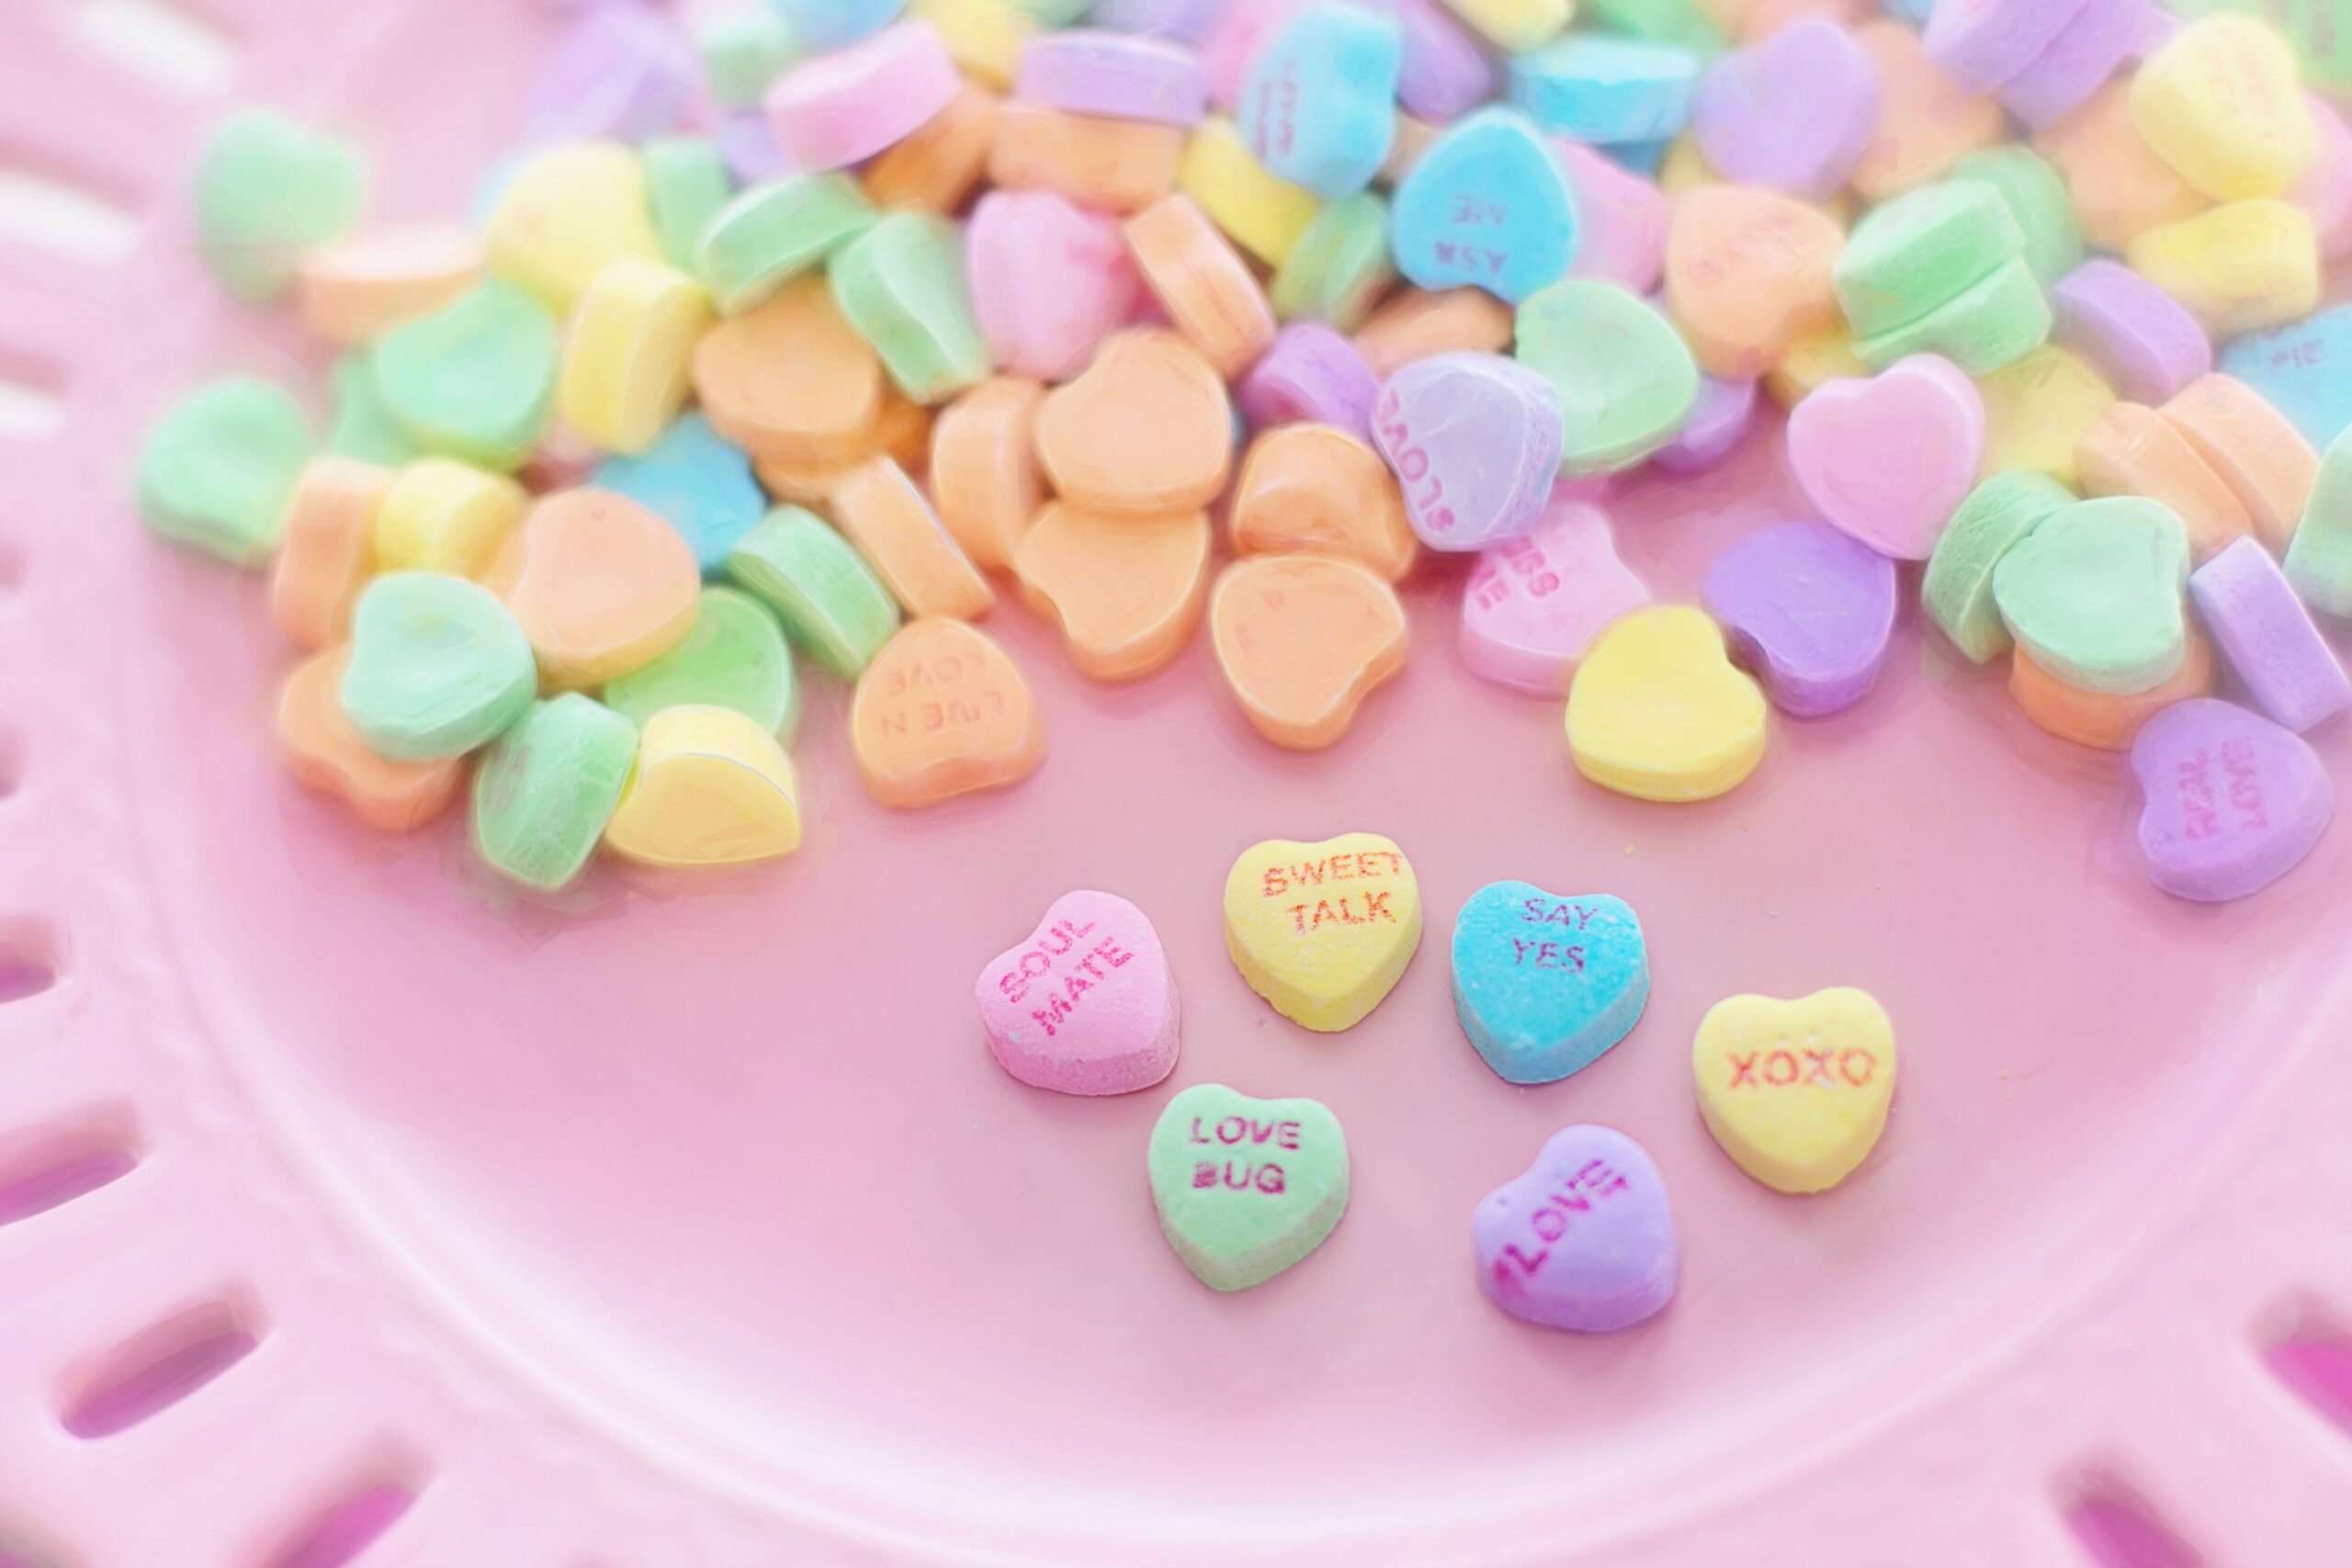 The Valentine's Day Candy Salad is perfect for events, Galentine's Day, hosting and more. Pictured: Conversation hearts candy